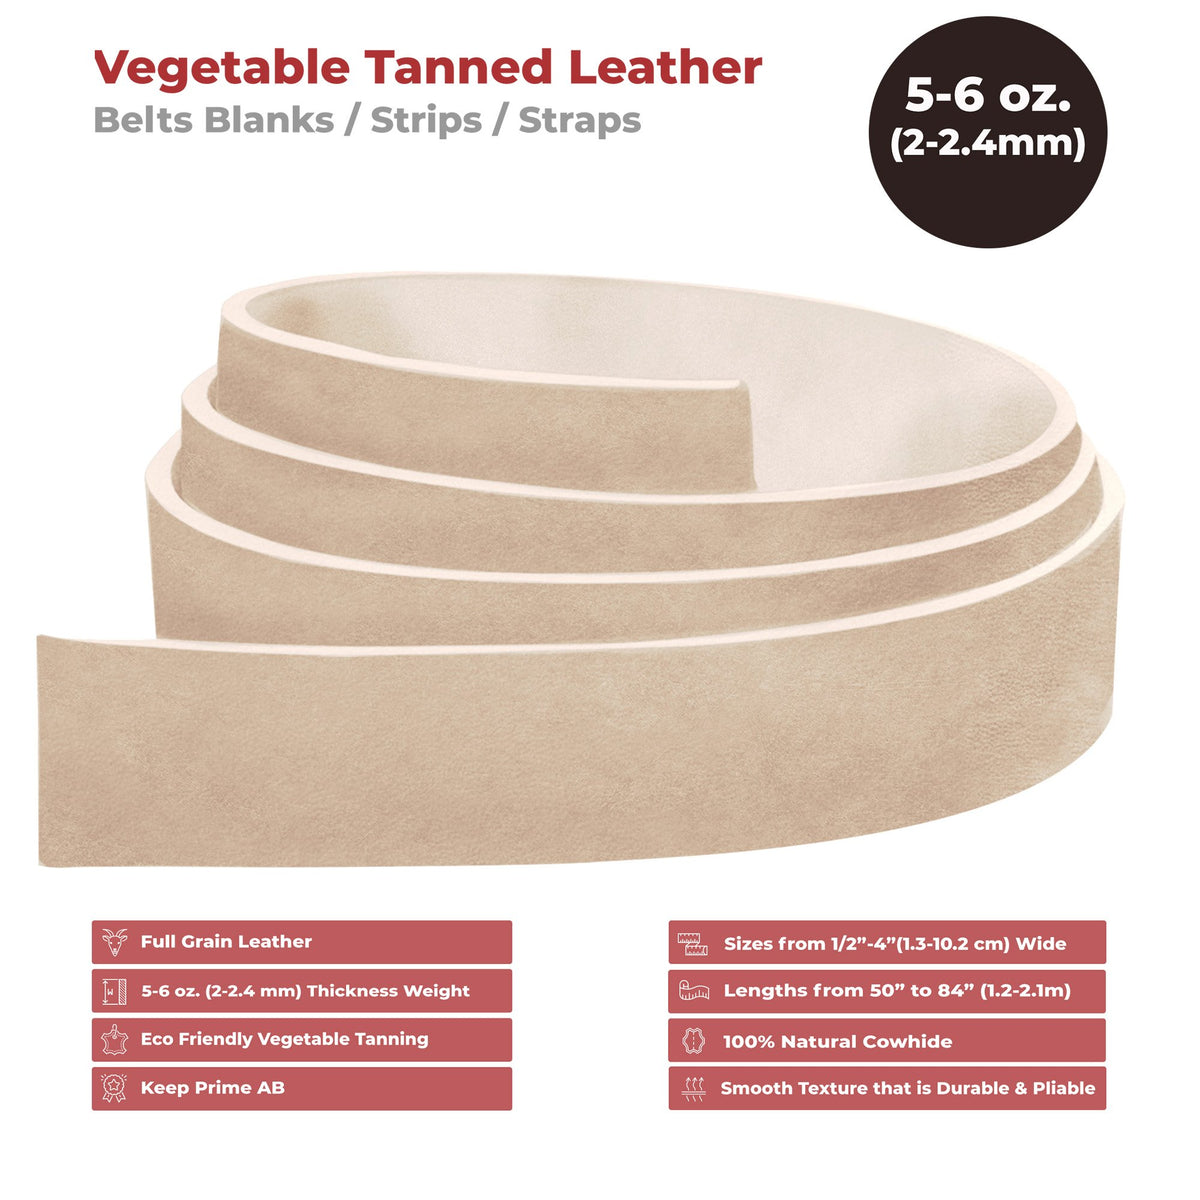 ELW Belt Blanks Strips/Straps 8/9 oz. (3.2-3.6mm) Thickness Size 1-1/2x50  Full Grain Import Natural Cowhide Vegetable Tanned Leather for Tooling